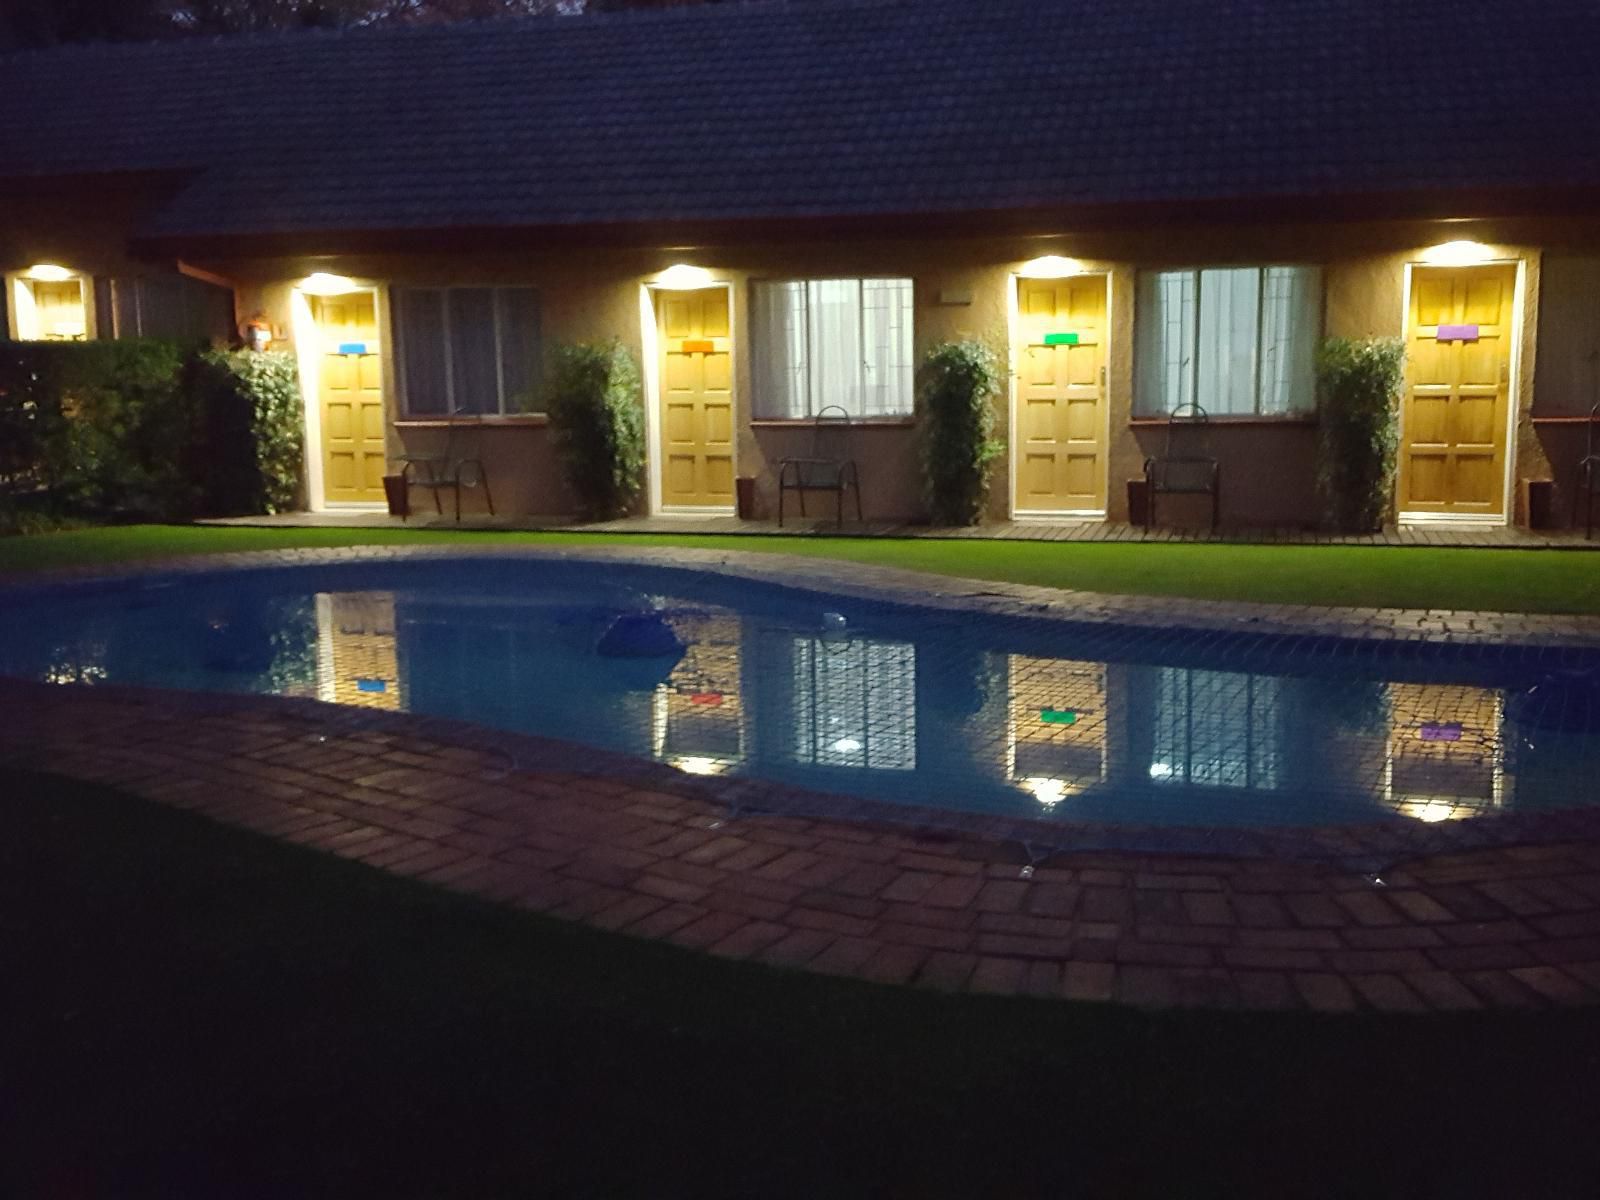 Tuishuis Lodge Clubview Centurion Gauteng South Africa House, Building, Architecture, Garden, Nature, Plant, Swimming Pool